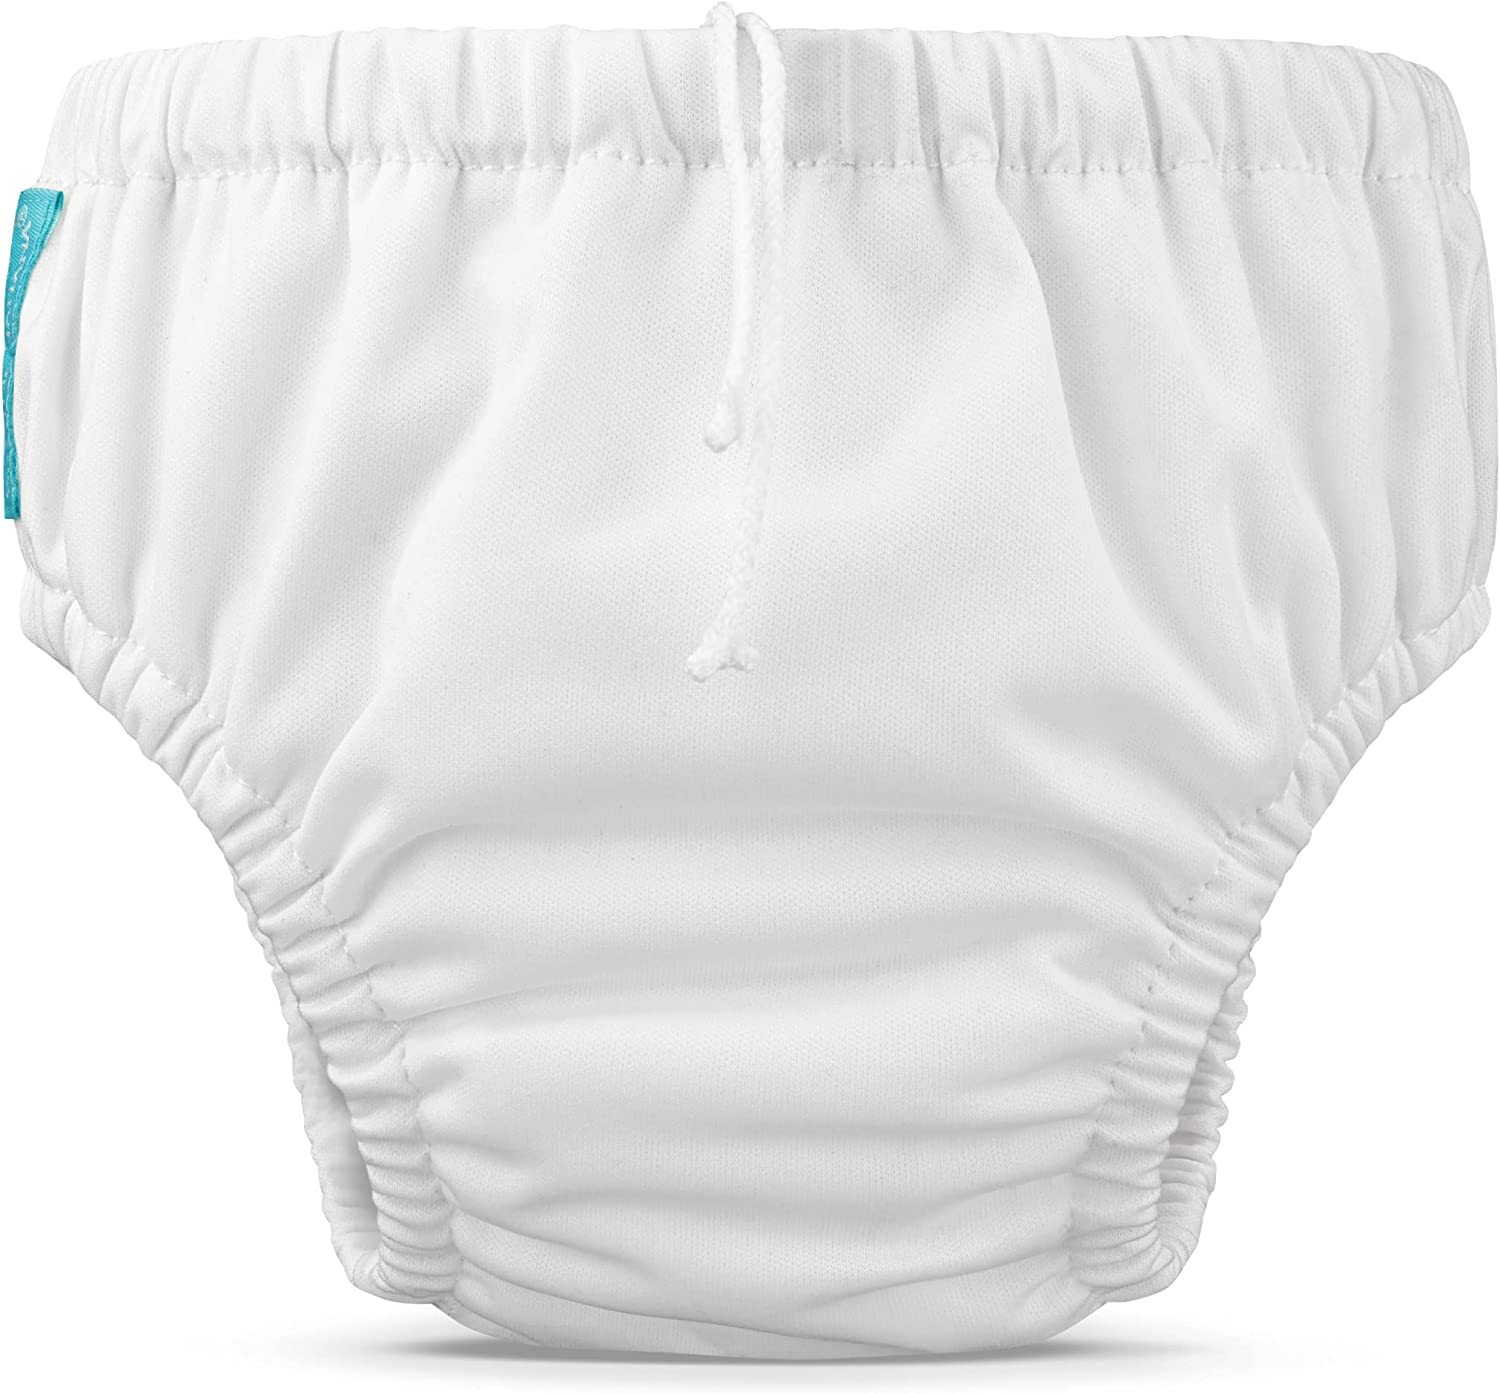 Charlie Banana Baby Reusable and Washable Swim Diaper for Boys or Girls, White, Small (Pack of 1)